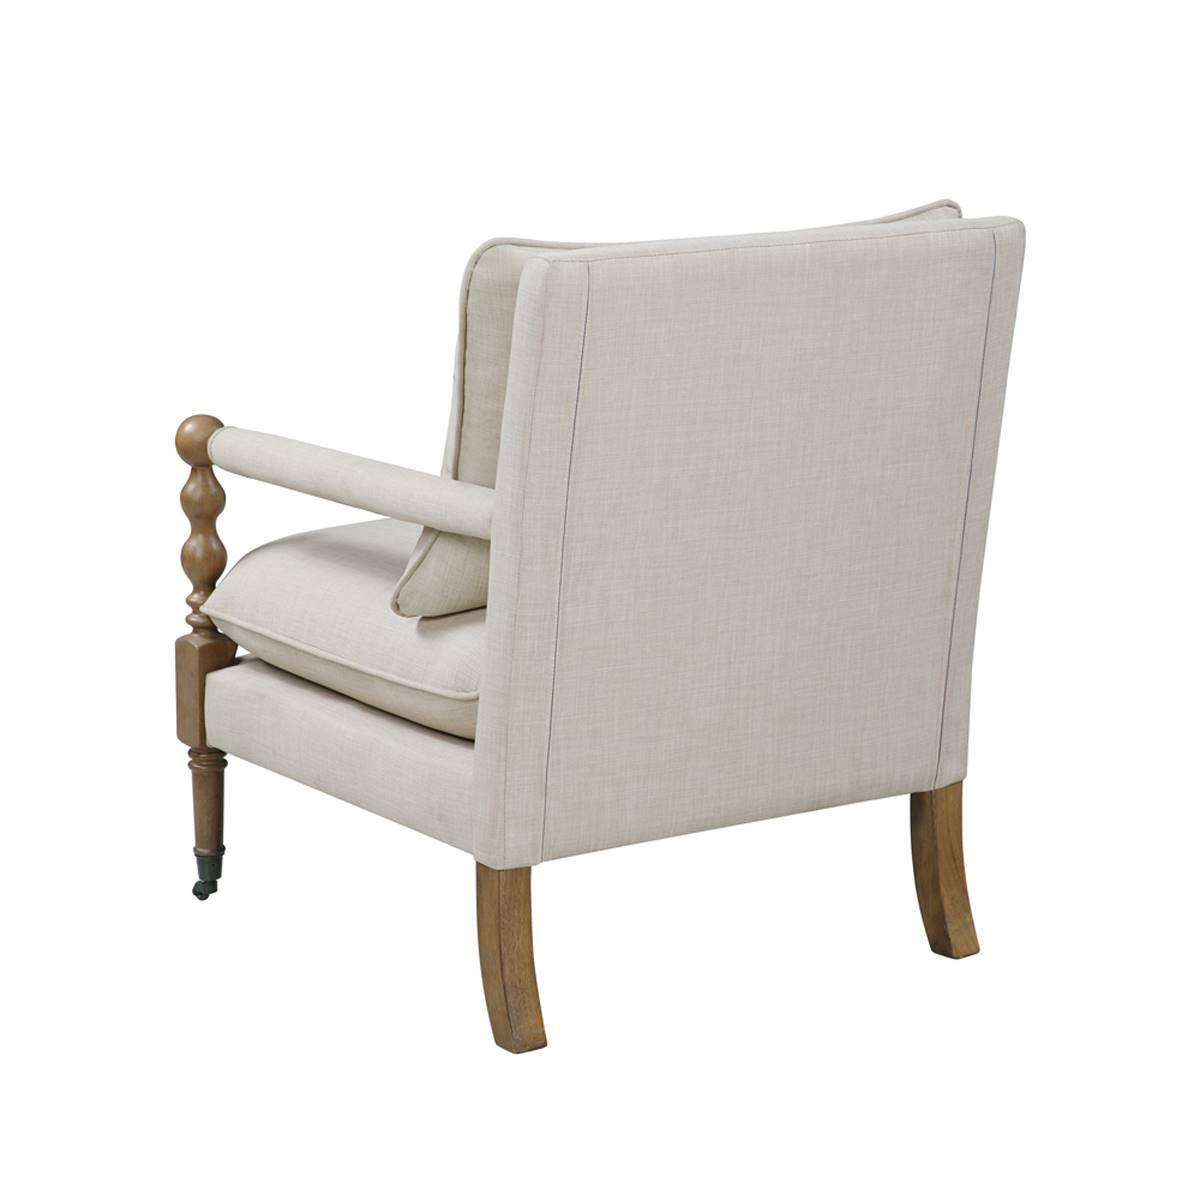 Coaster Upholstered Accent Chair With Casters - Beige/Dark Oak